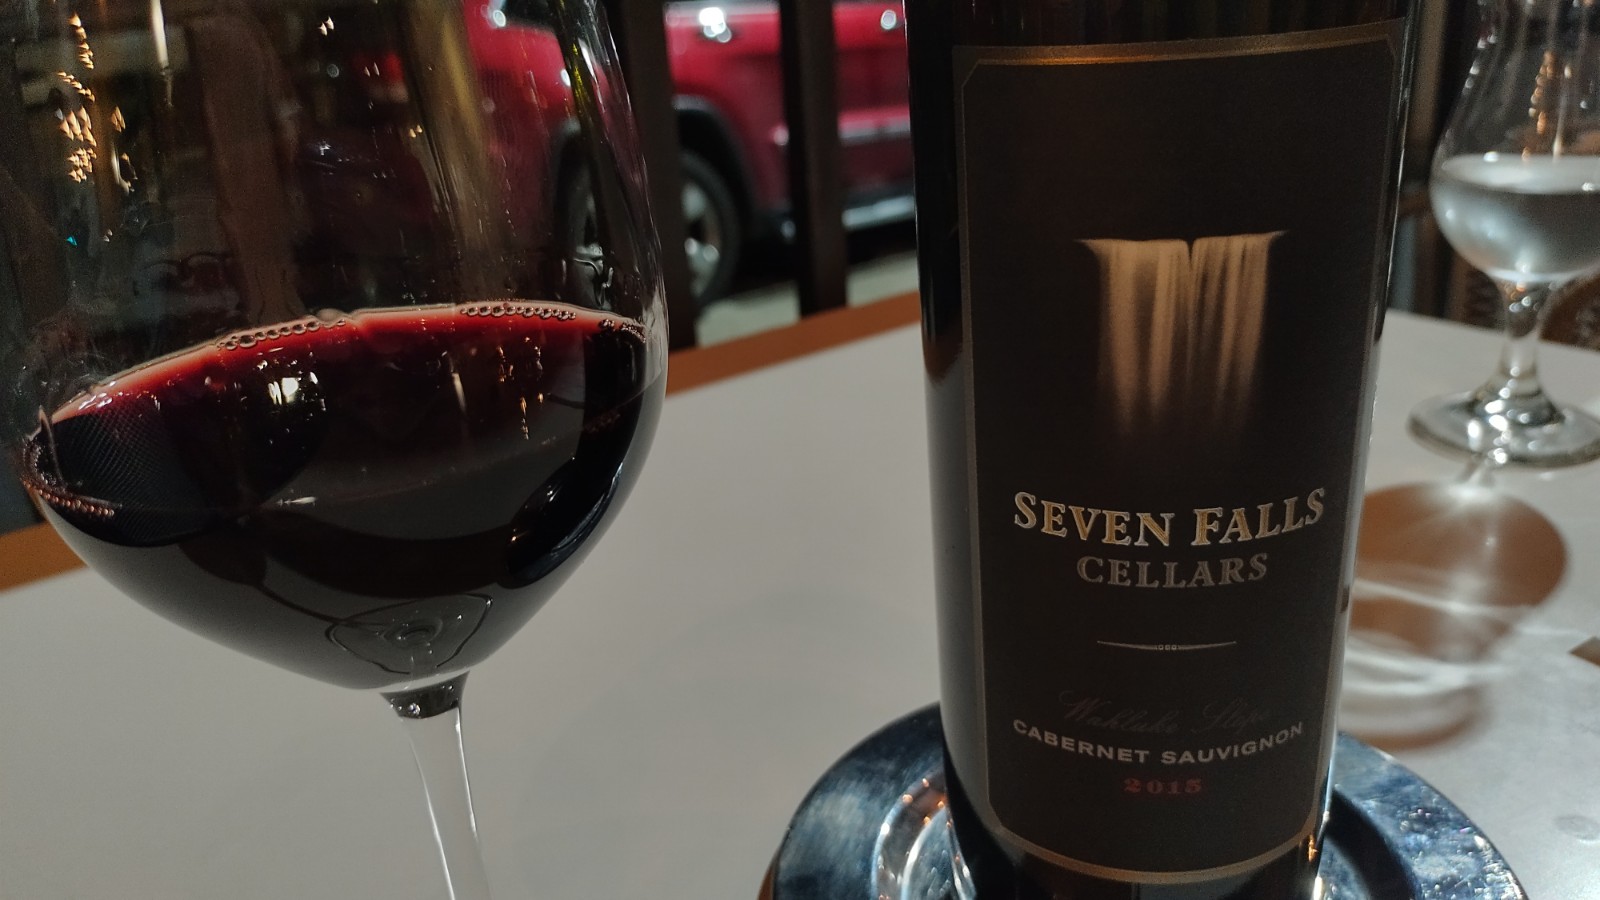 Picture of the Seven Falls cabernet.